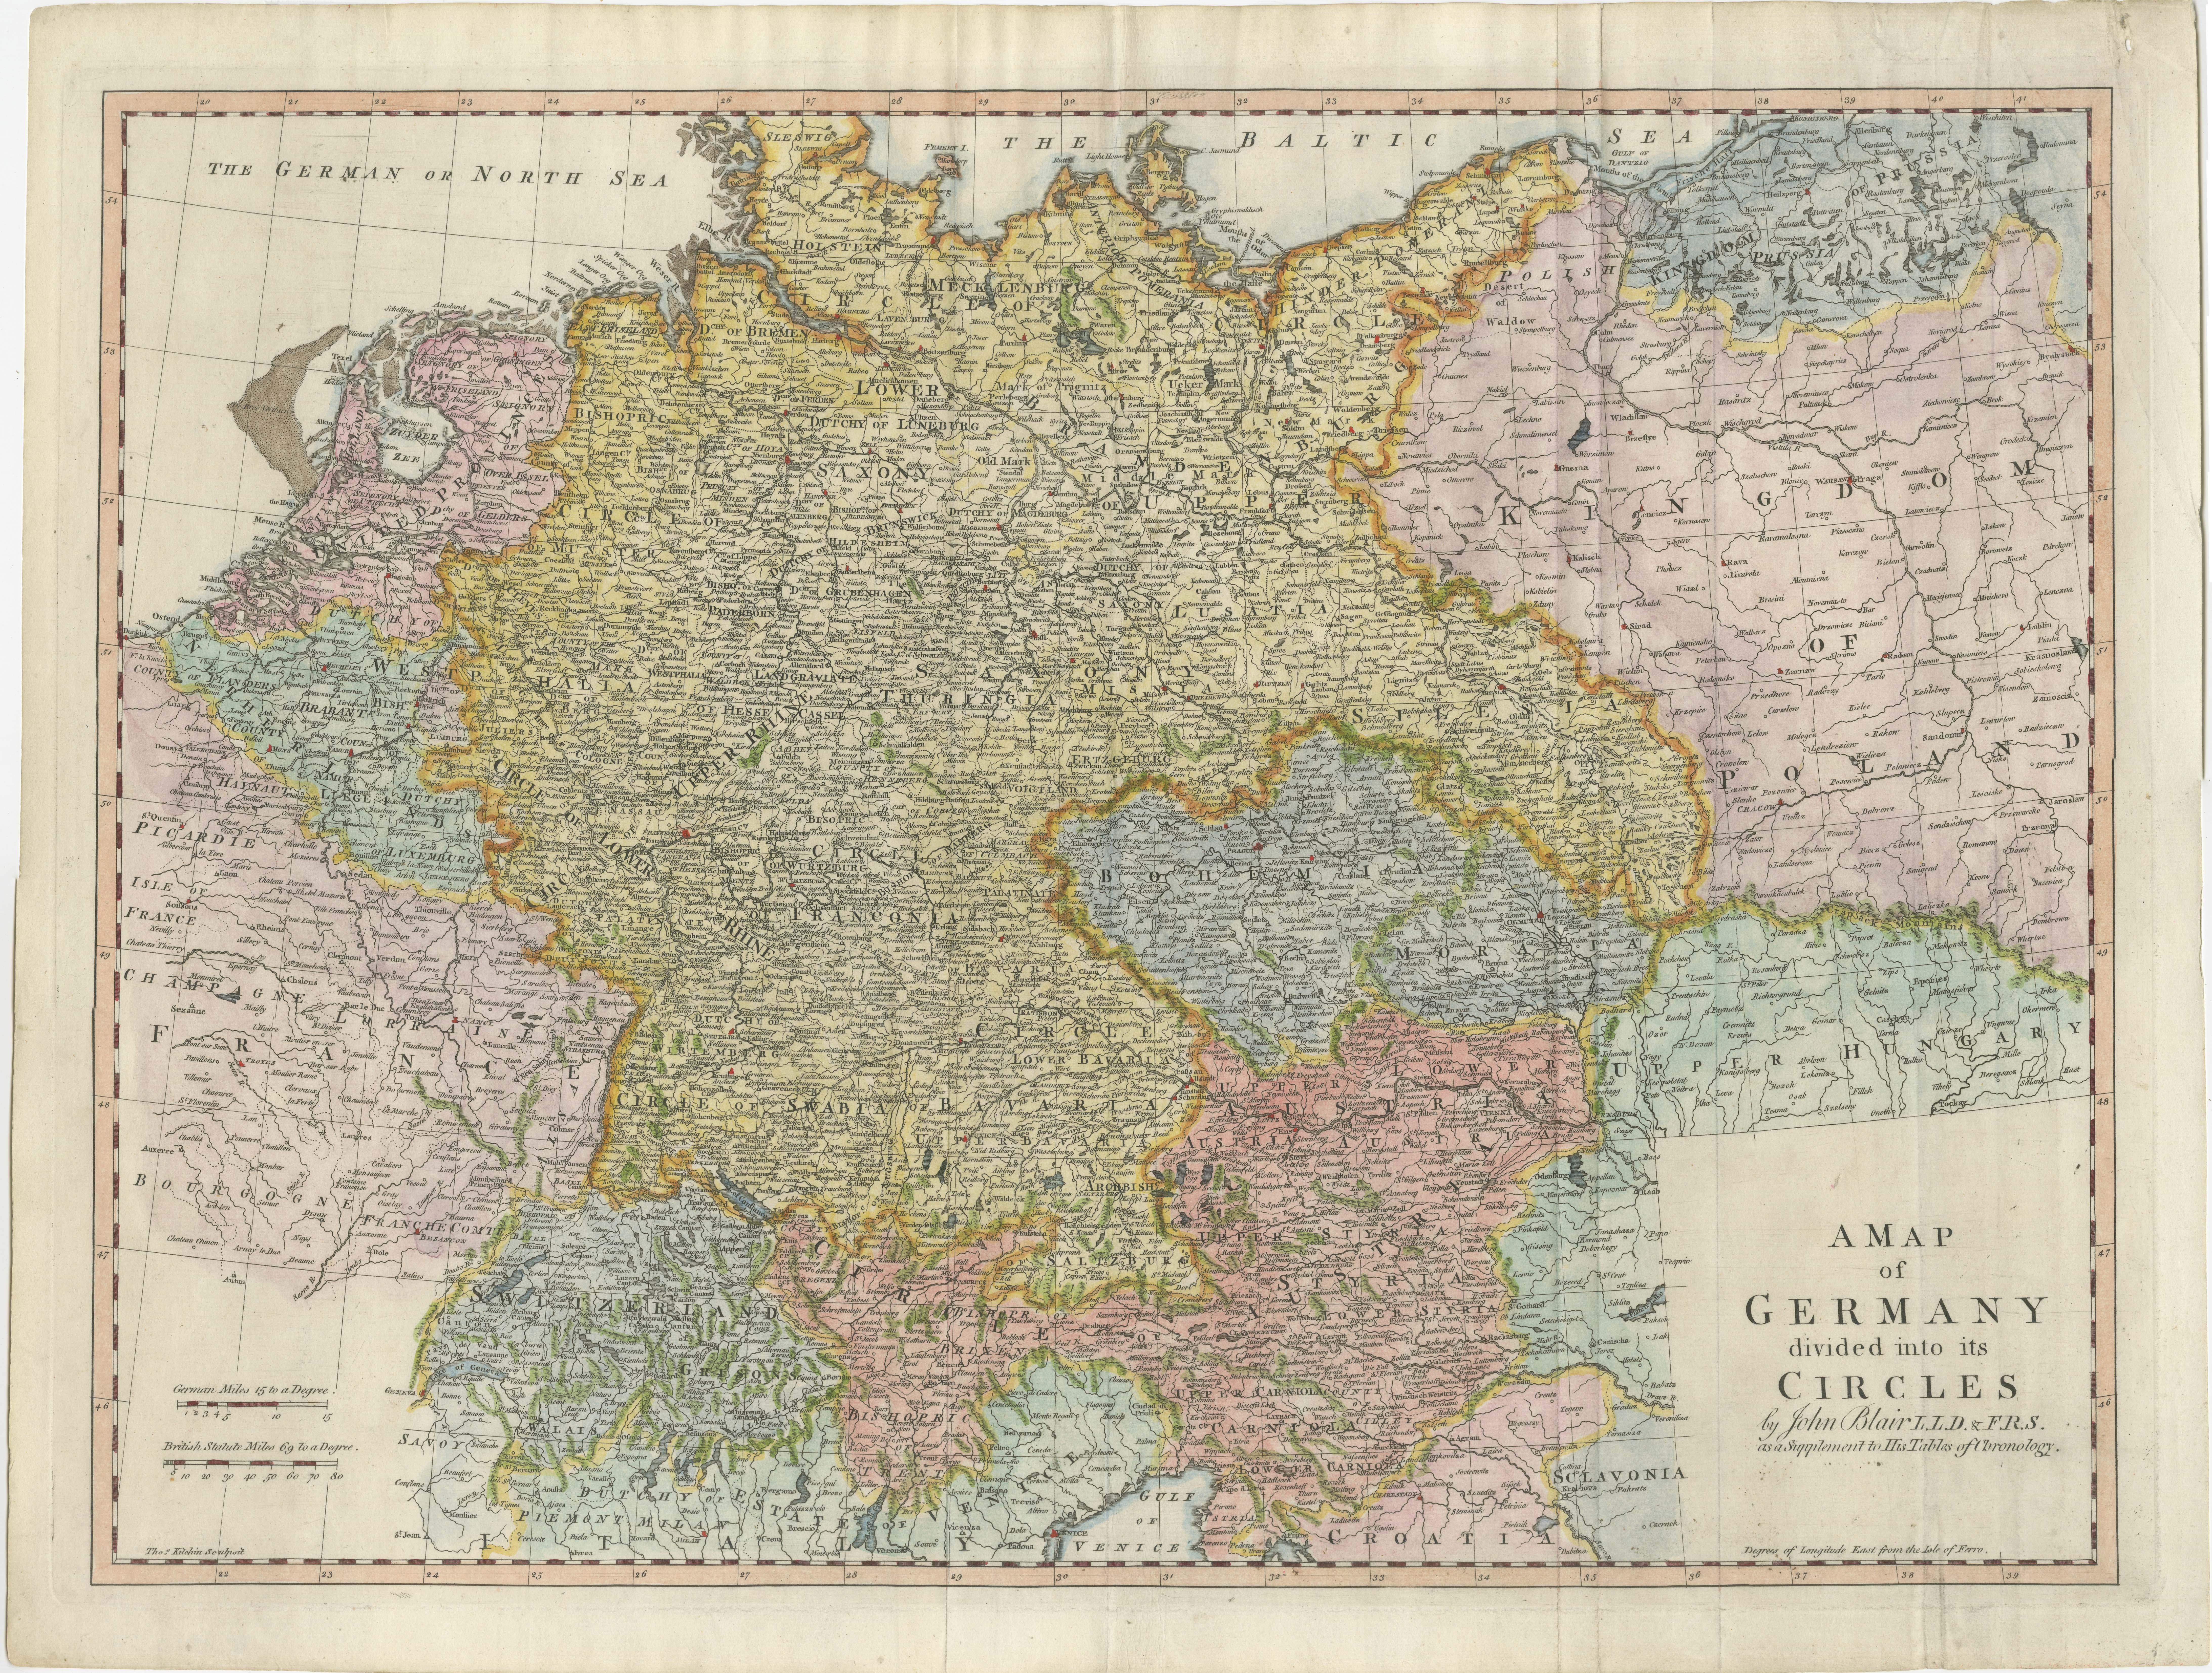 Antique map titled 'A Map of Germany (..)'. Large antique map of the German Empire, highly detailed. Engraved by T. Kitchin. Published J. Blair, circa 1779.